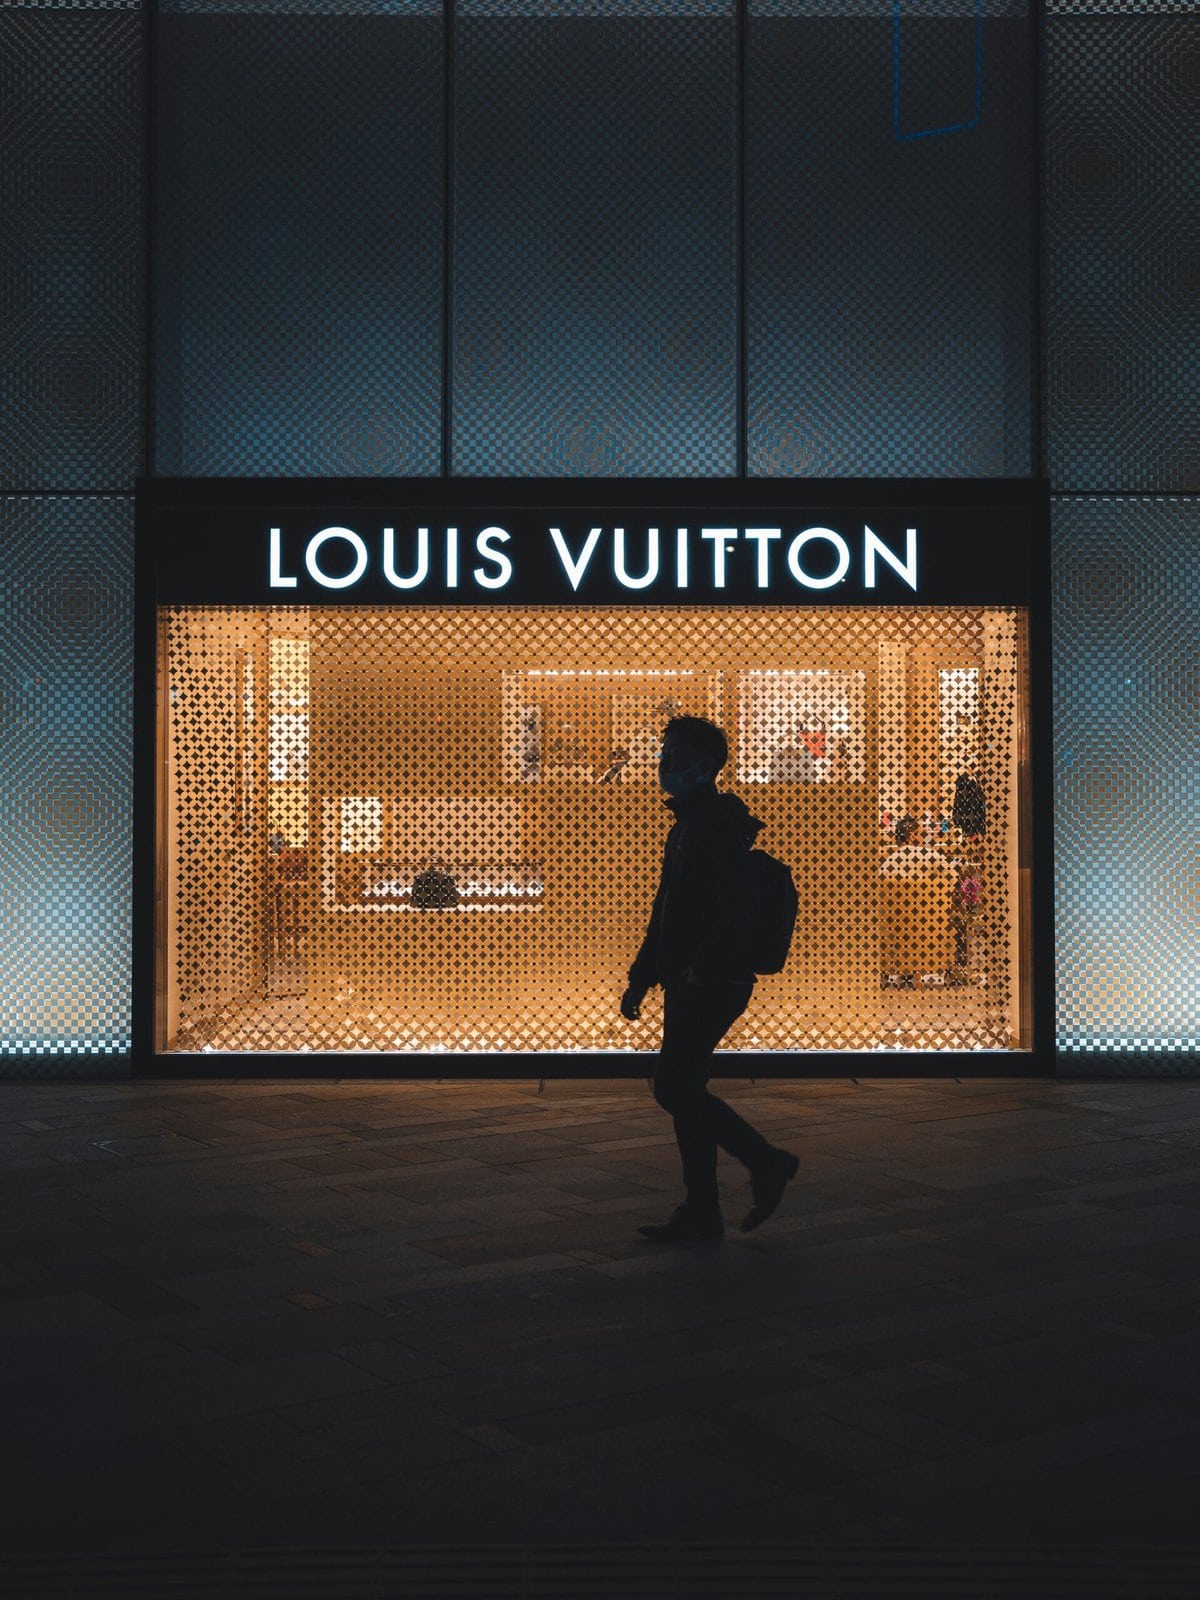 Louis Vuitton Japan: The Ultimate Destination for Luxury Shopping